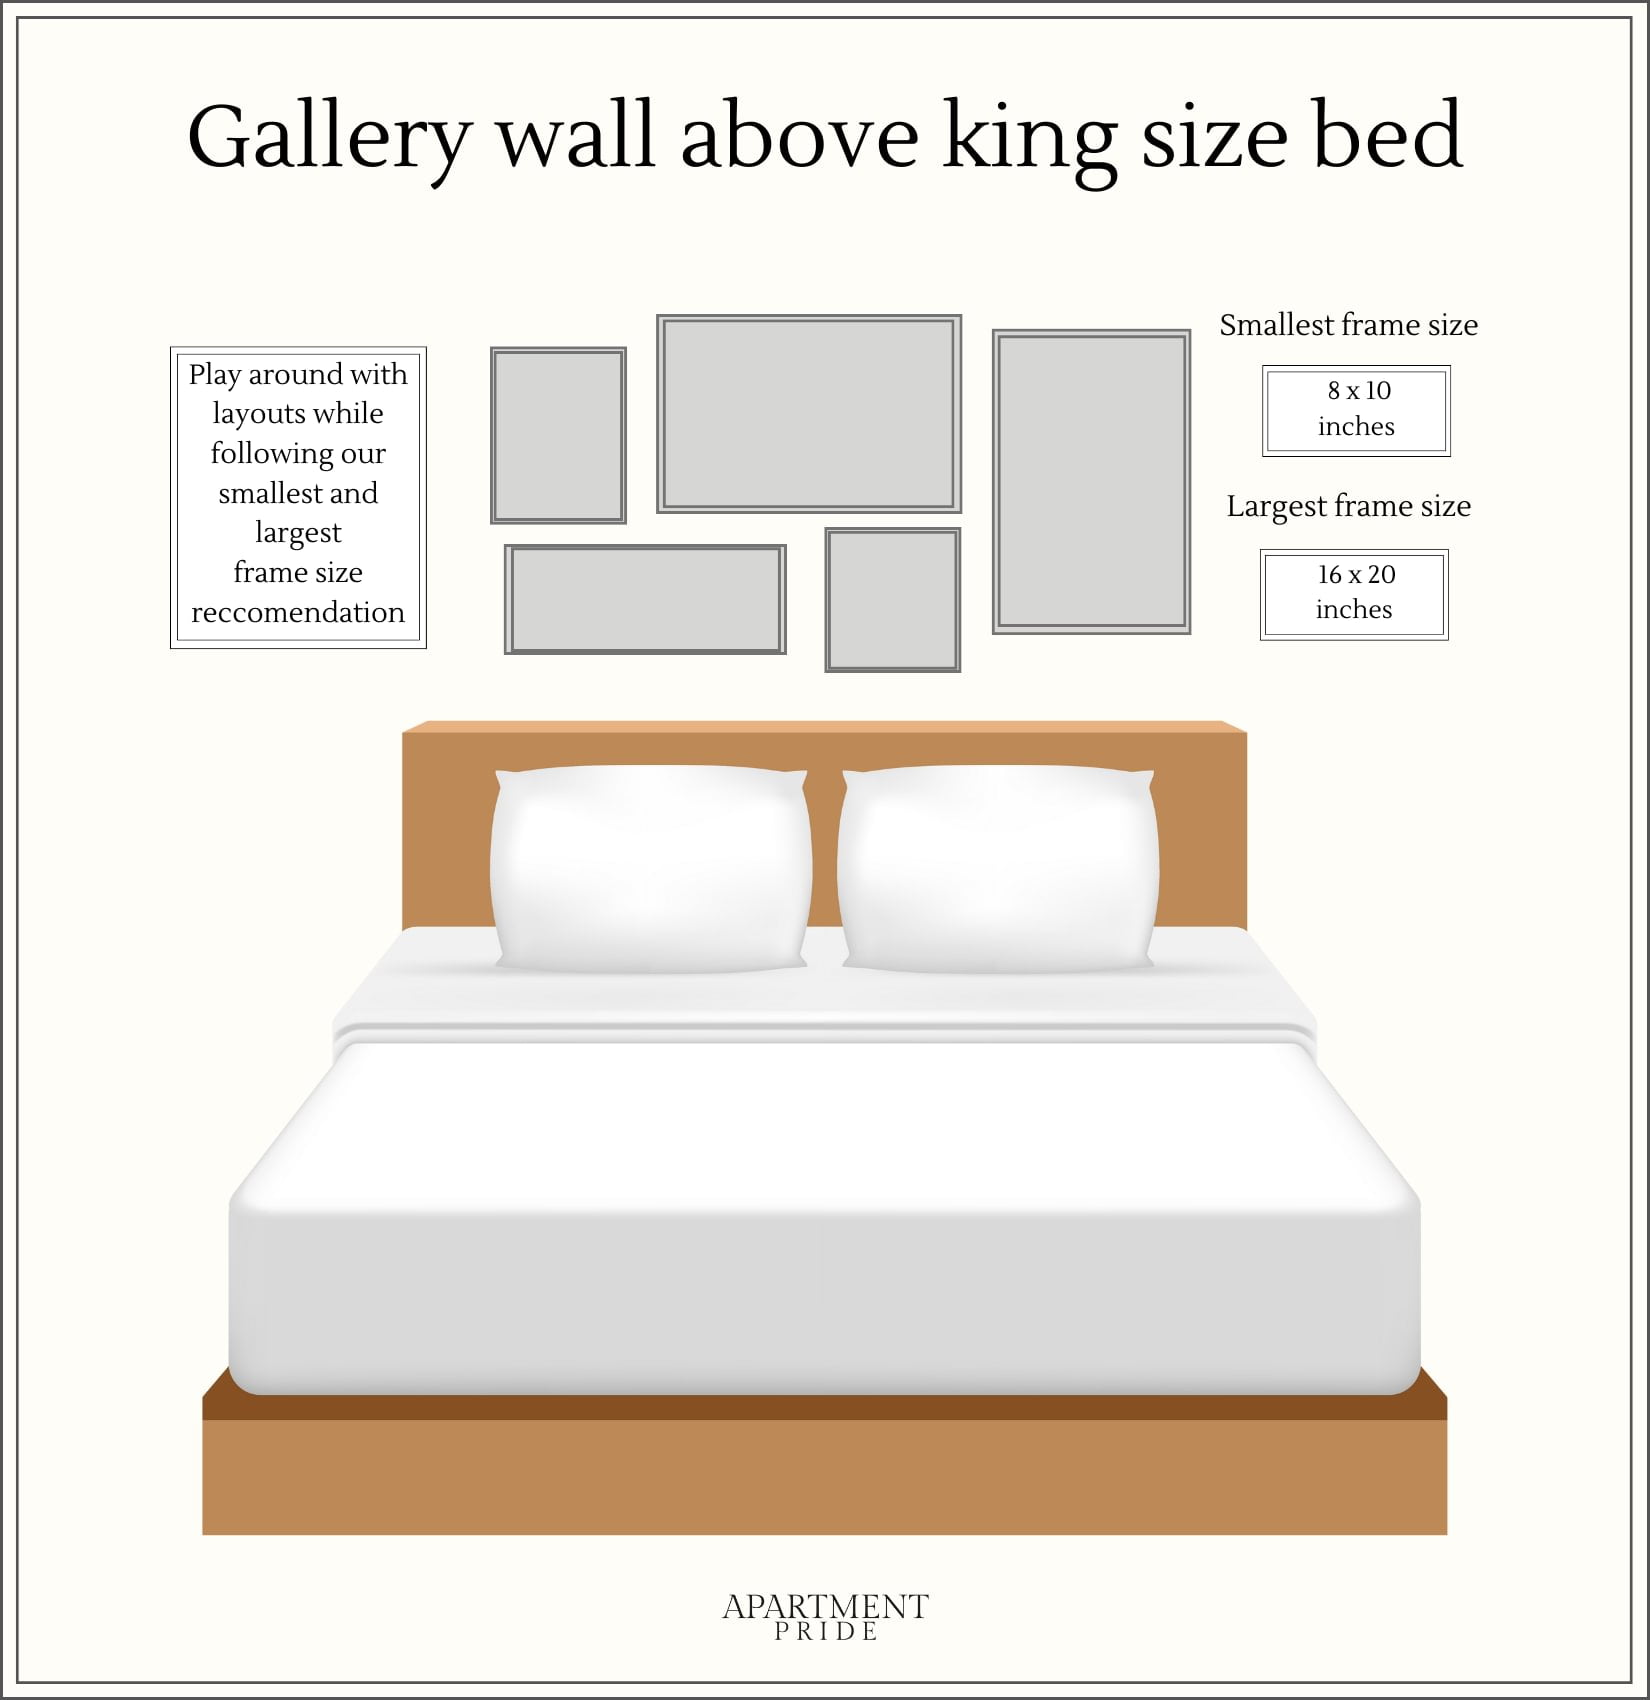 Tips for gallery wall spacing above king bed